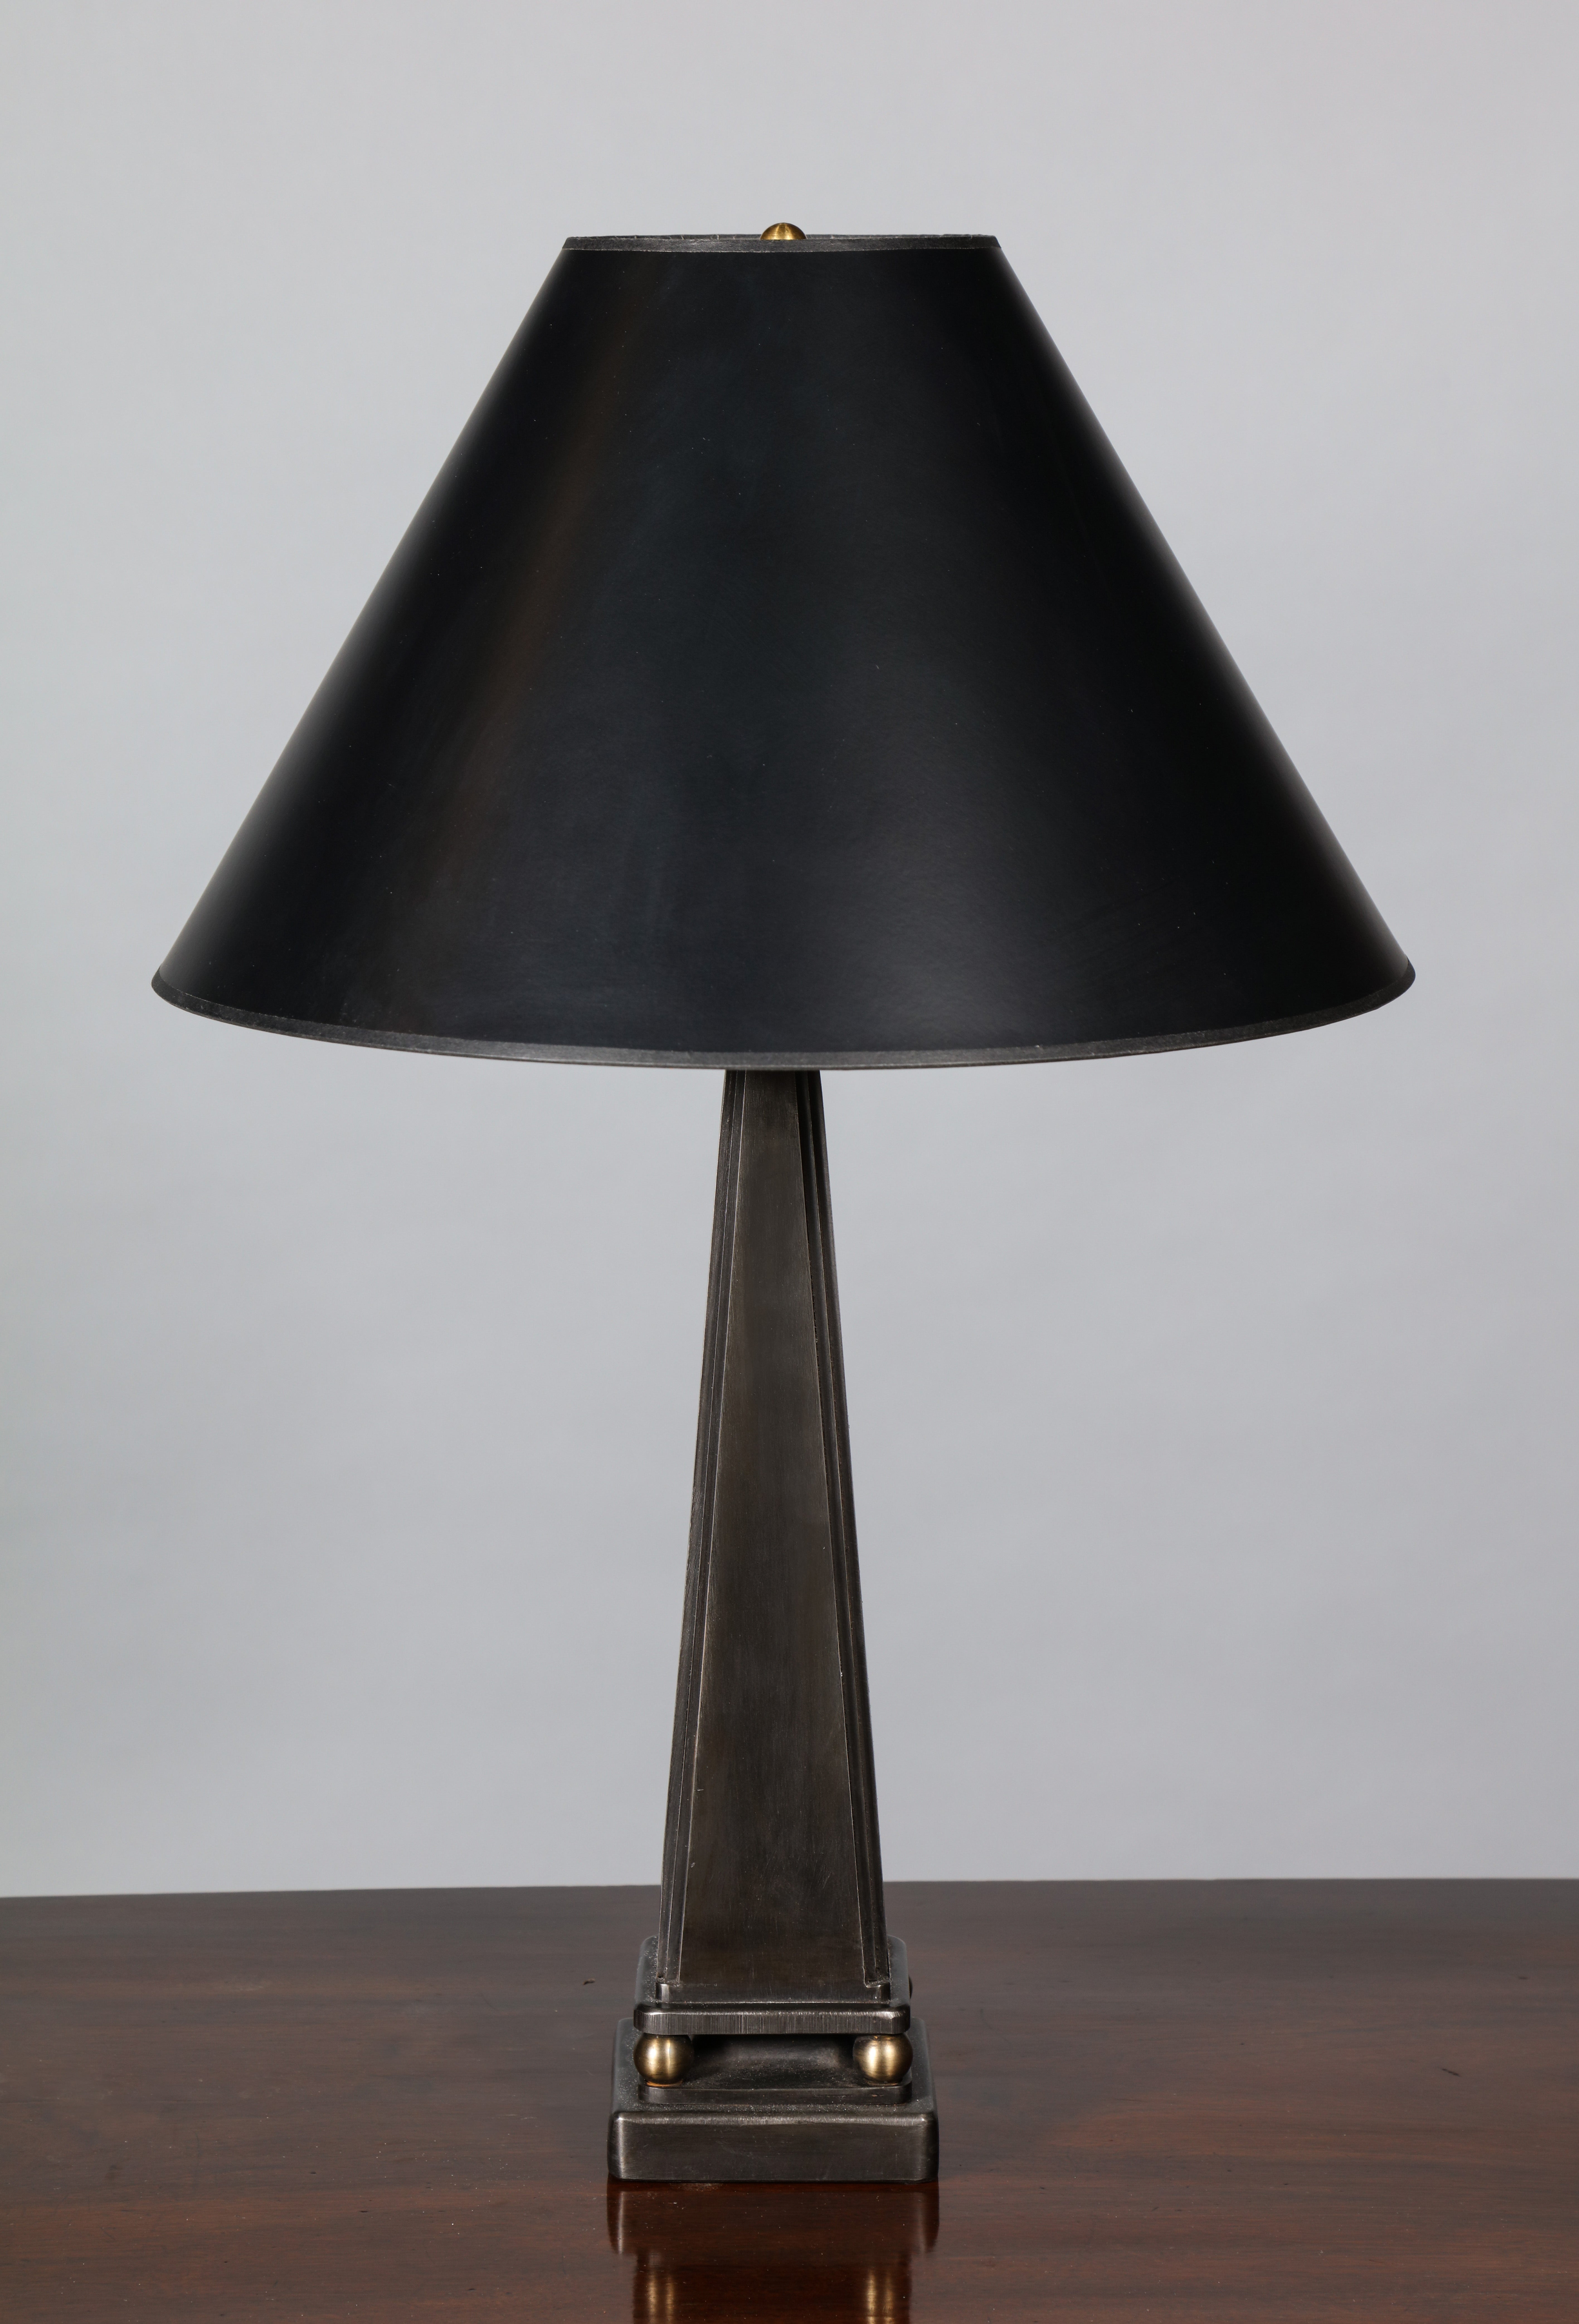 A handmade steel table lamp in pyramid form – raised on ball feet and set on a square plinth. The design references the French neoclassical aesthetic of the 1930s through late 1940s through features of fluting and tapers.

The brass detailing has